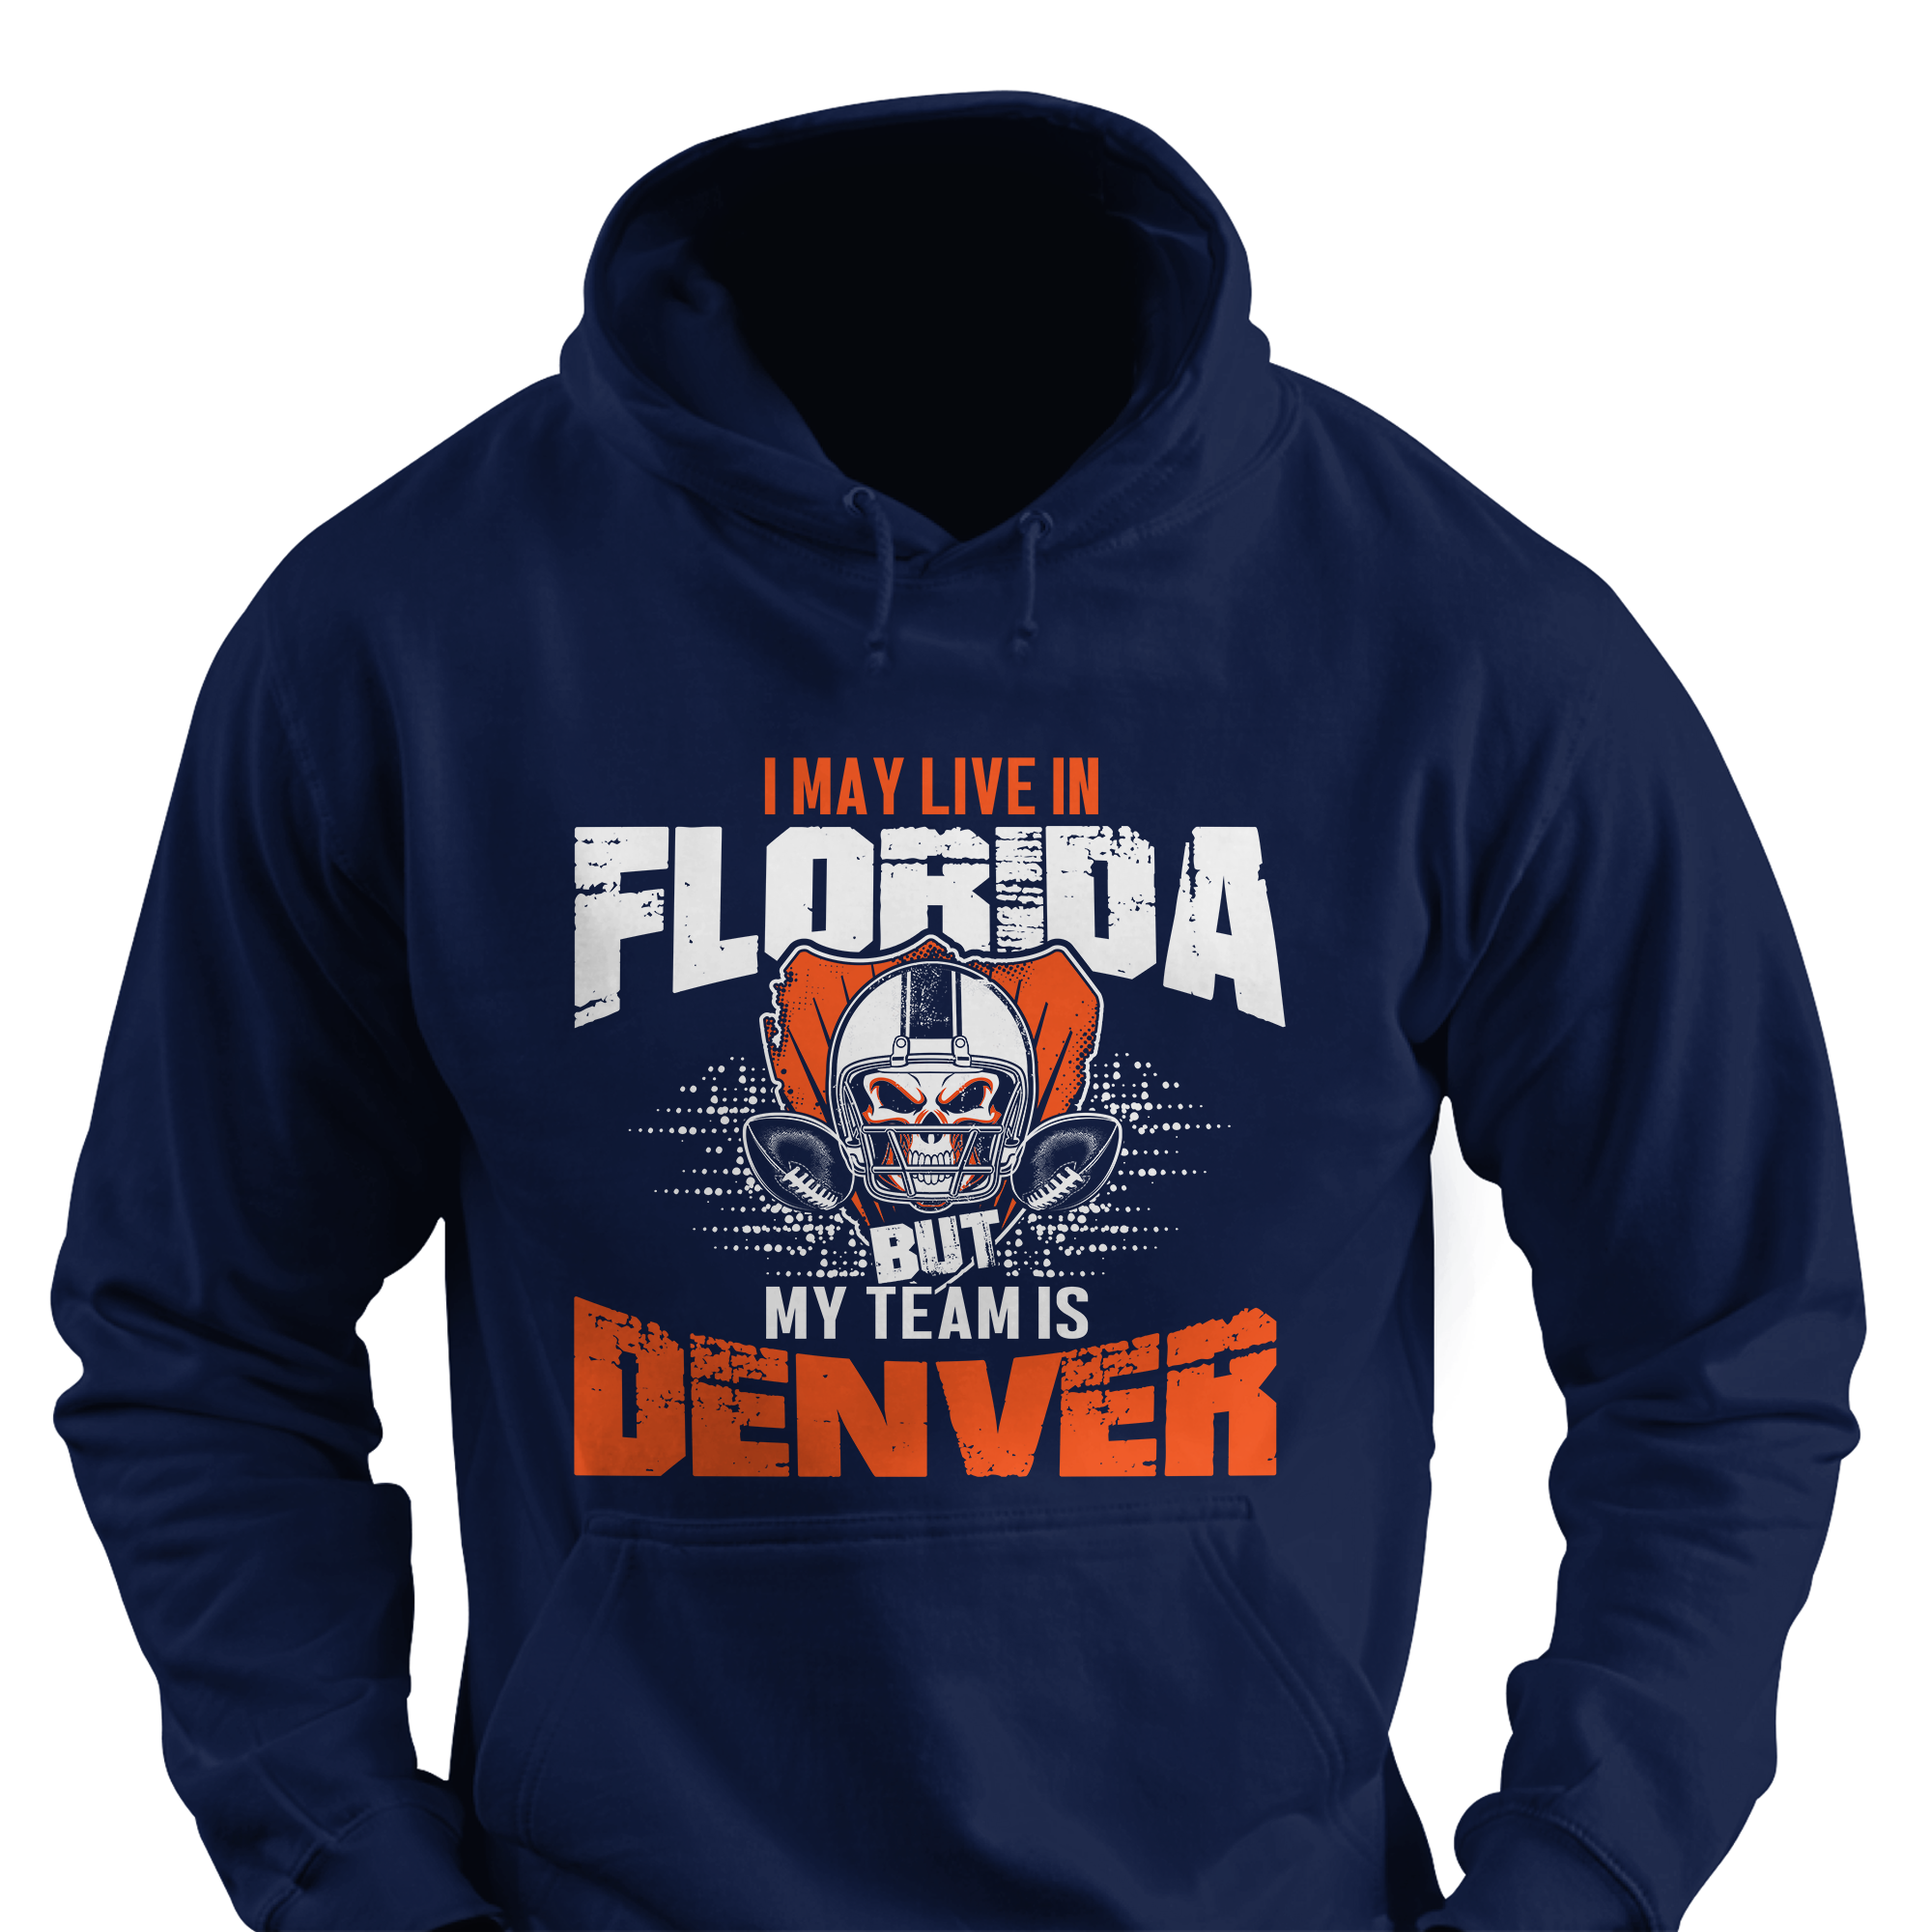 I May Live in Florida but My Team is Denver